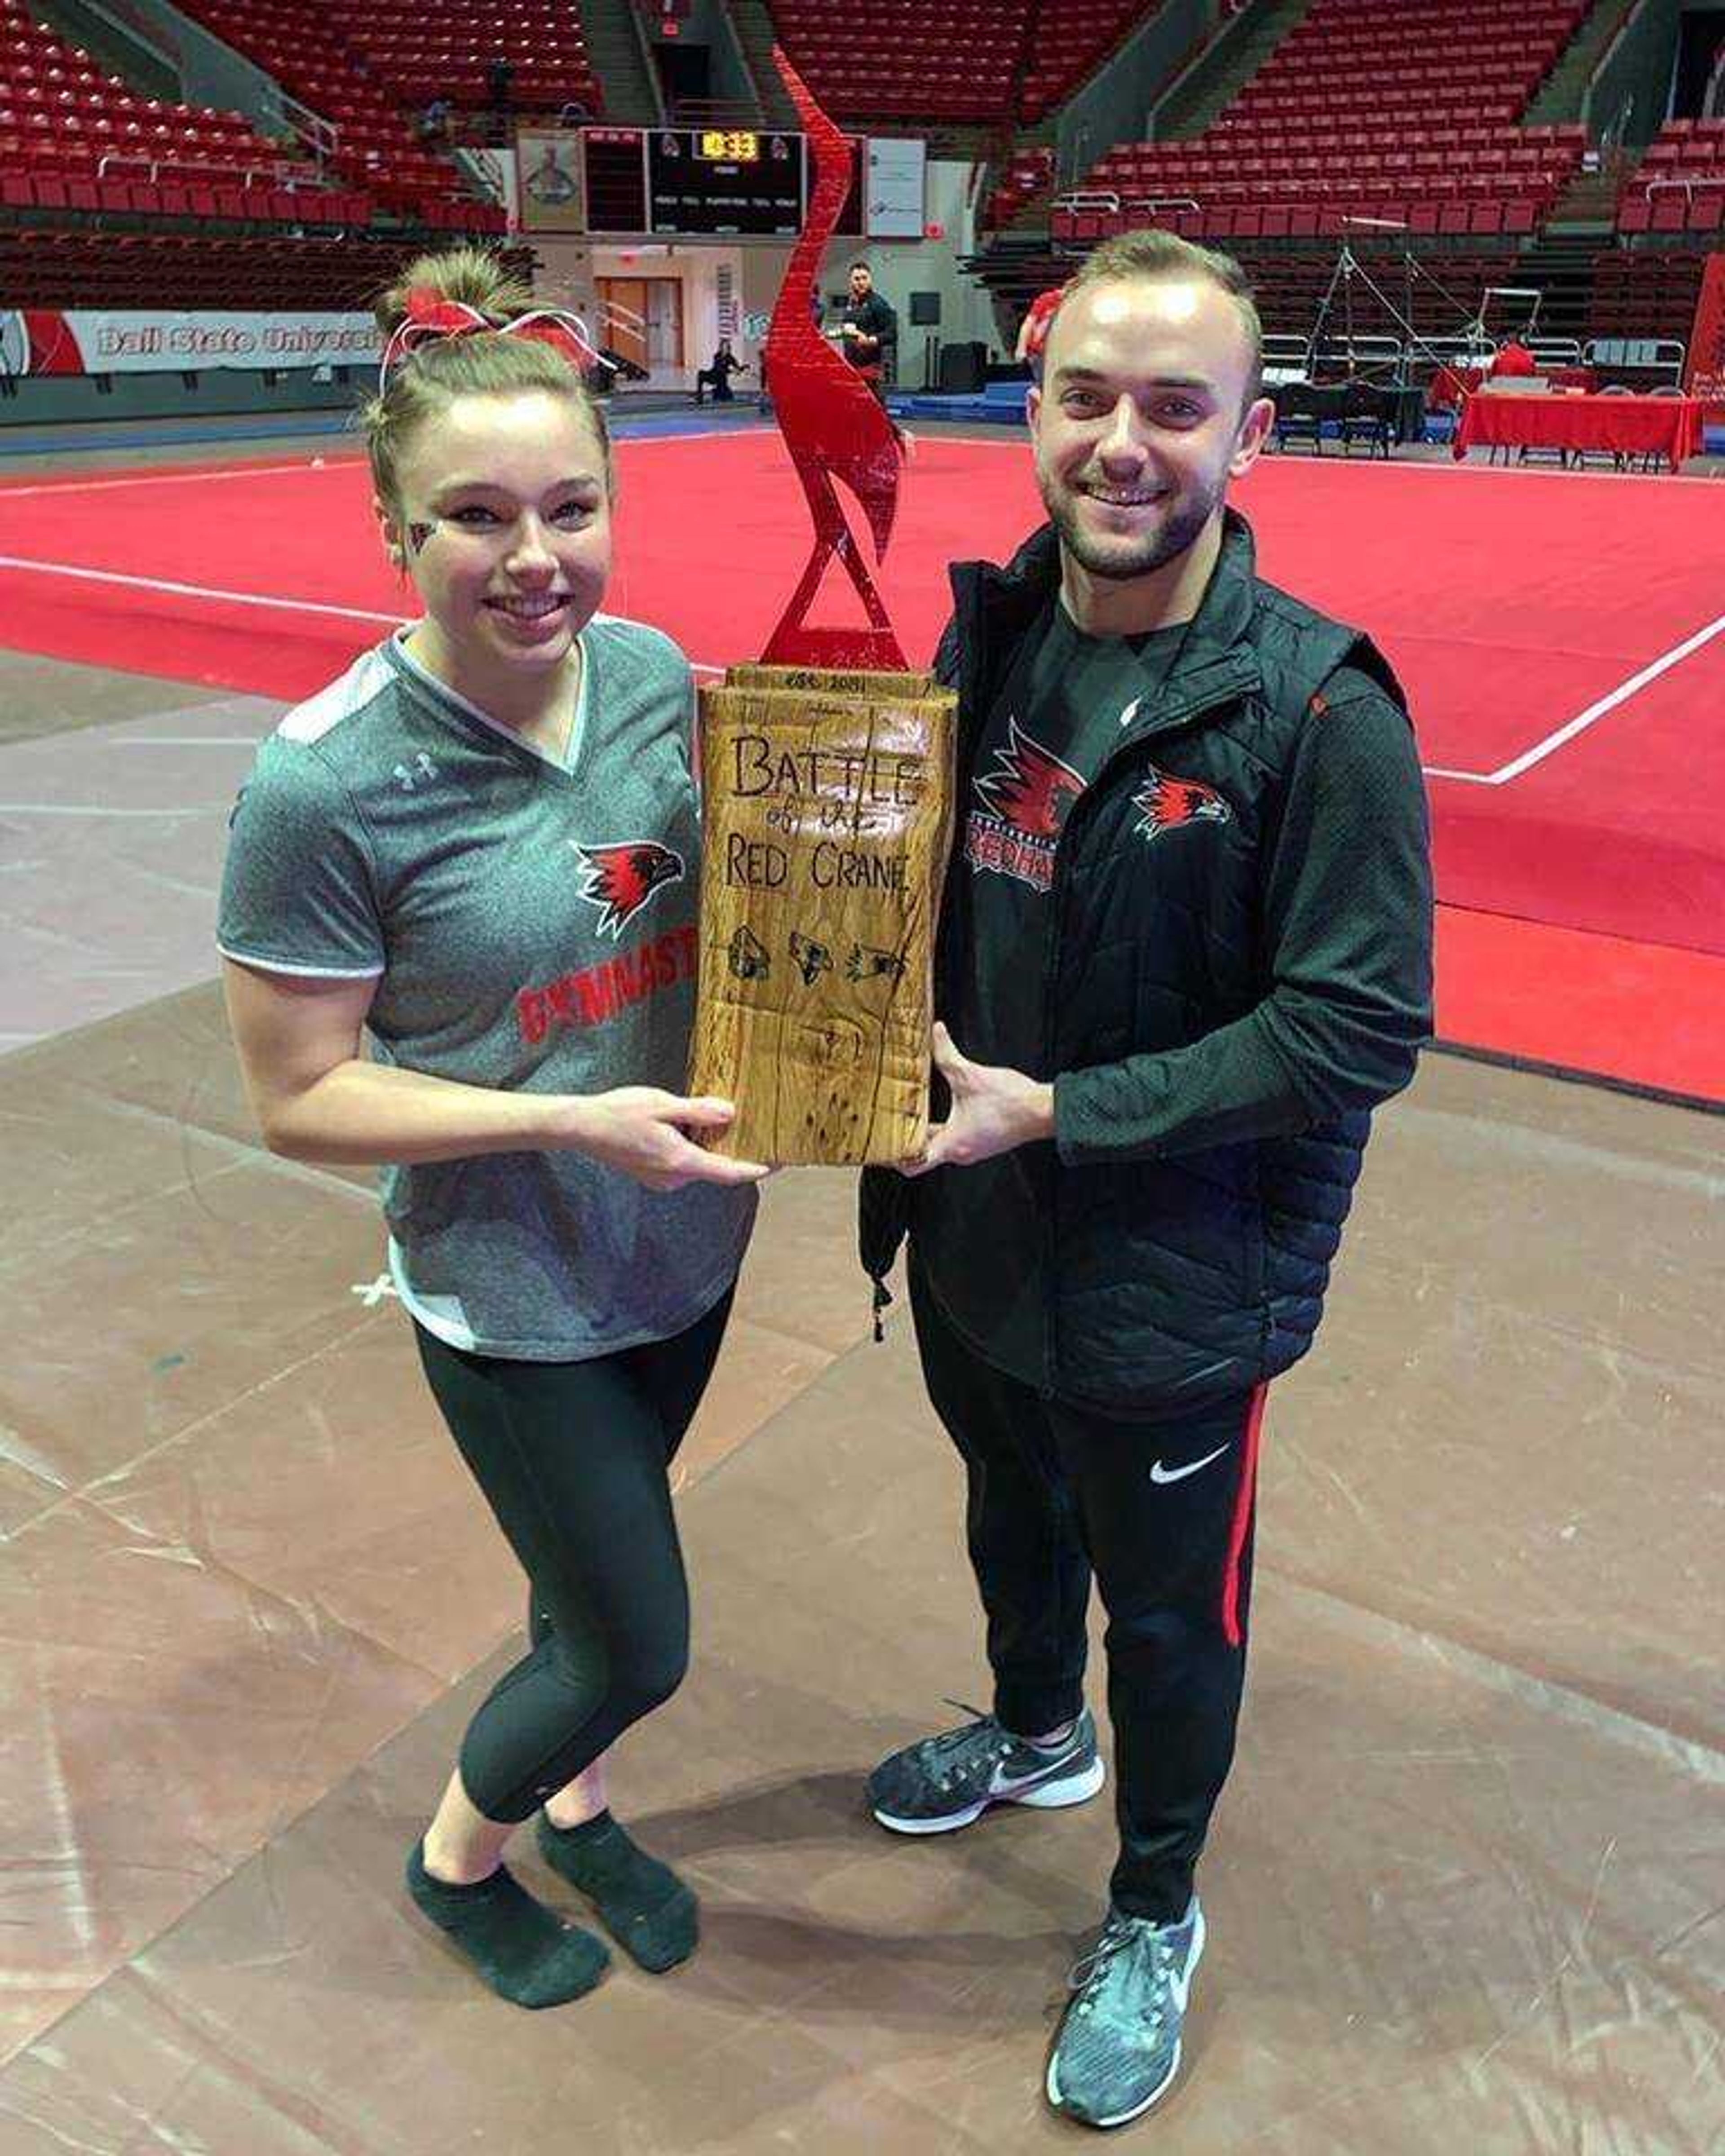 Junior gymnast Kendra Benak and assistant coach Chris Licamelli hold the trophy the two constructed for the Battle of the Red Crane.